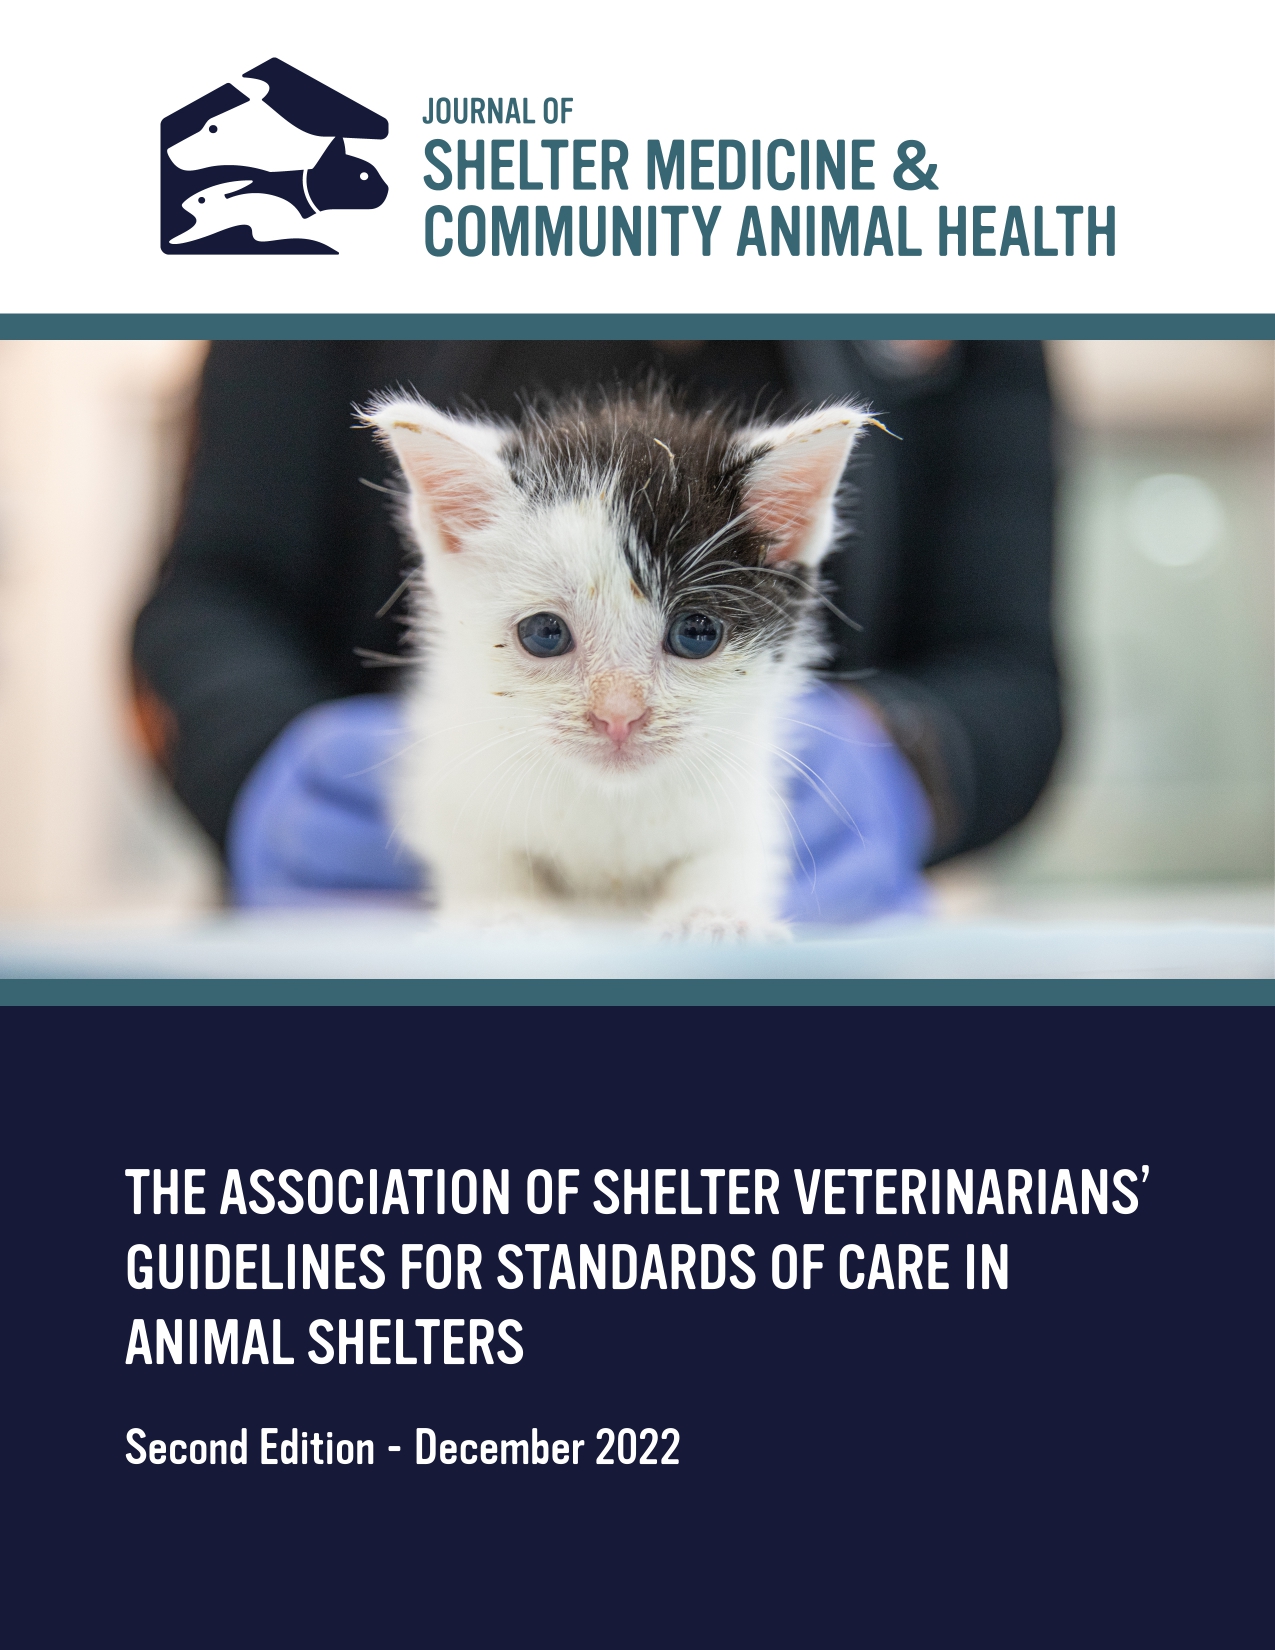 					View The Guidelines for Standards of Care in Animal Shelters, Second Edition
				